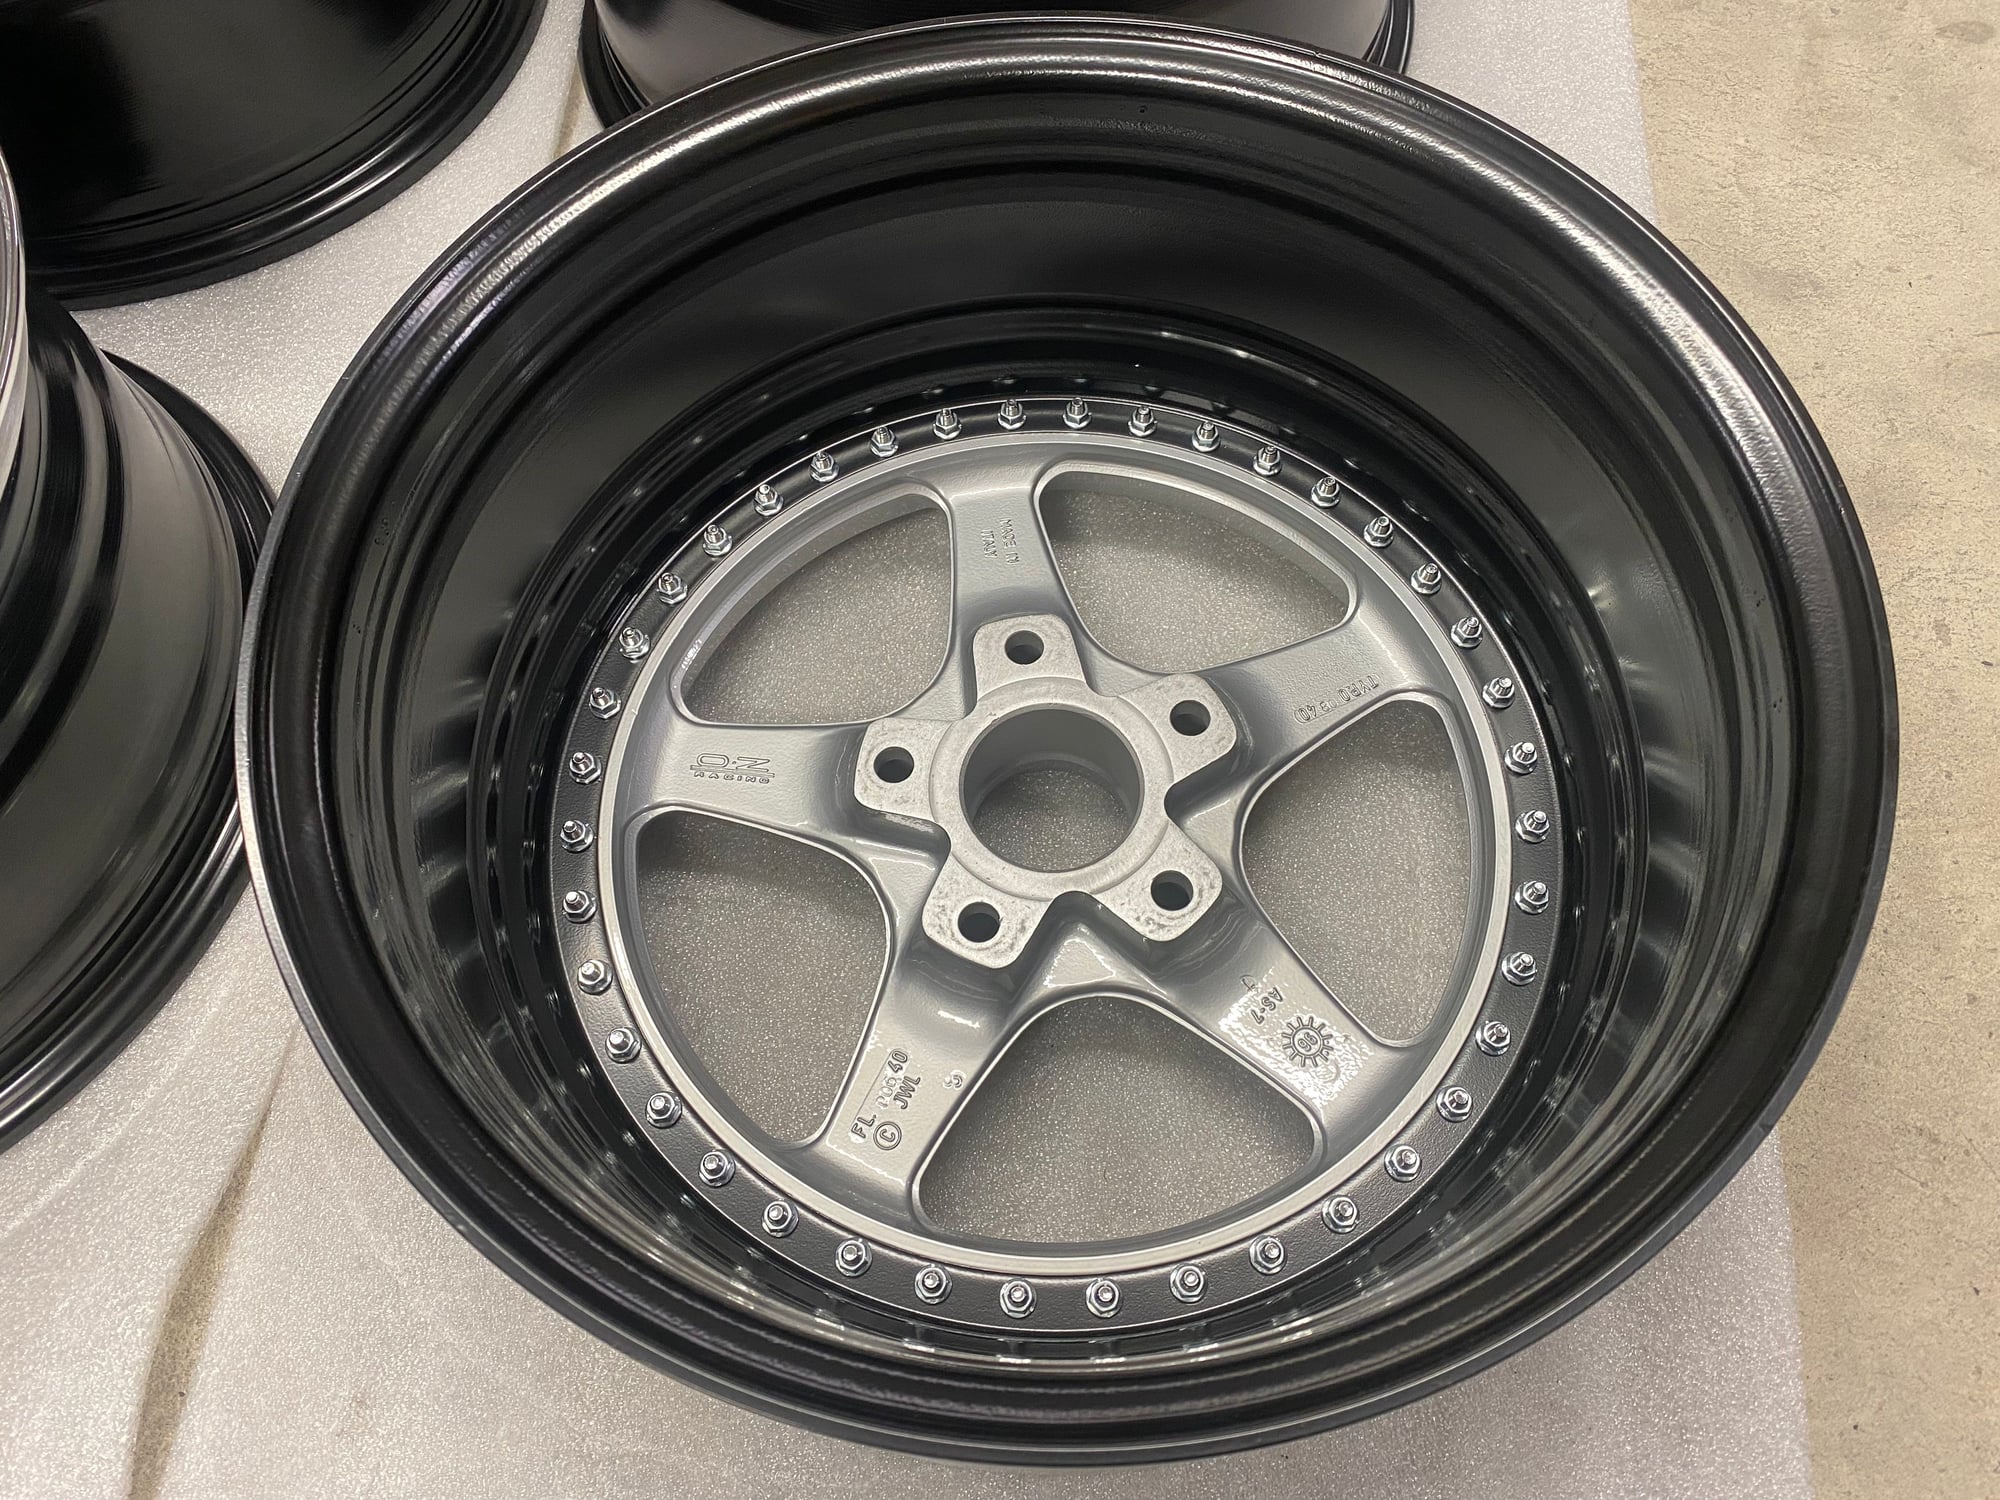 Wheels and Tires/Axles - Techart Championship Formula Wheel set 18 x 8.5 / 11 for NB 993 - Mint Condition! - New - 1995 to 1998 Porsche 911 - Dundalk, MD 21222, United States